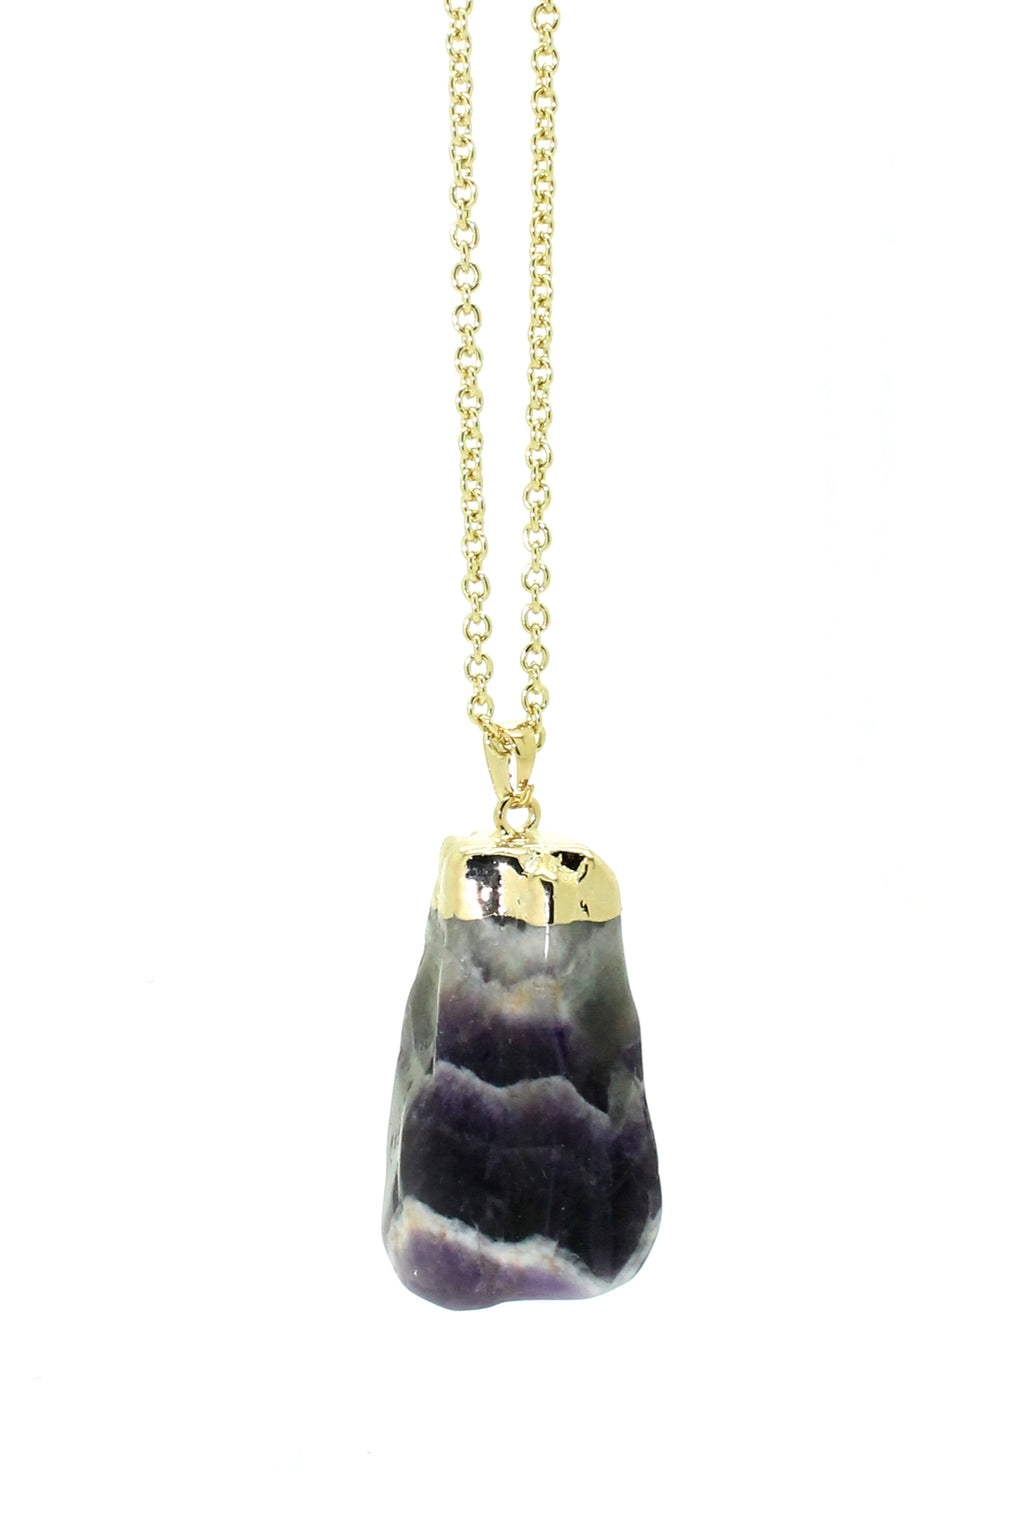 Natural amethyst stone necklace.